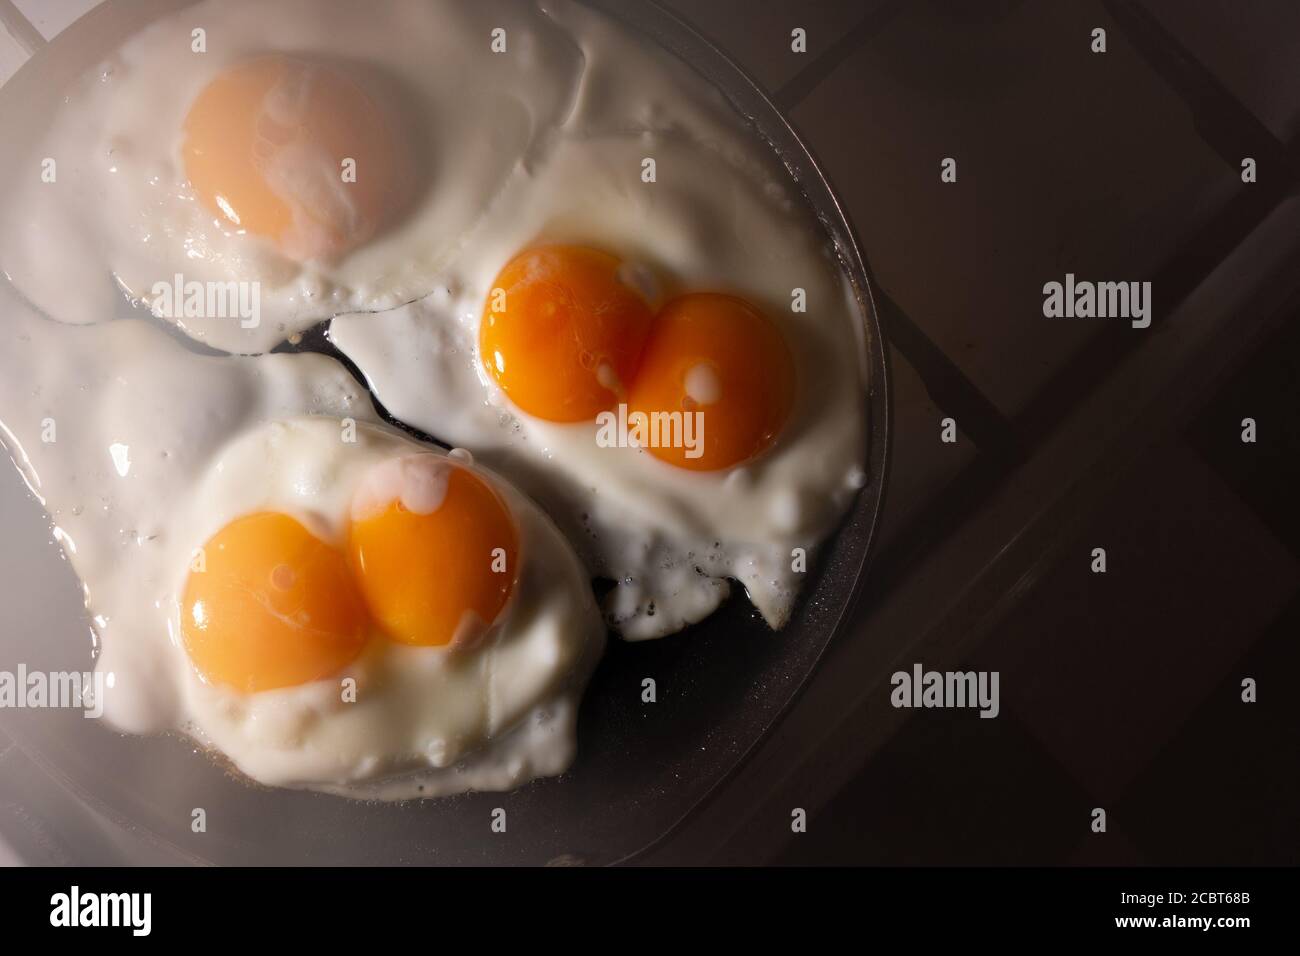 Two Fried Eggs Stock Photo, Picture and Royalty Free Image. Image 17696336.